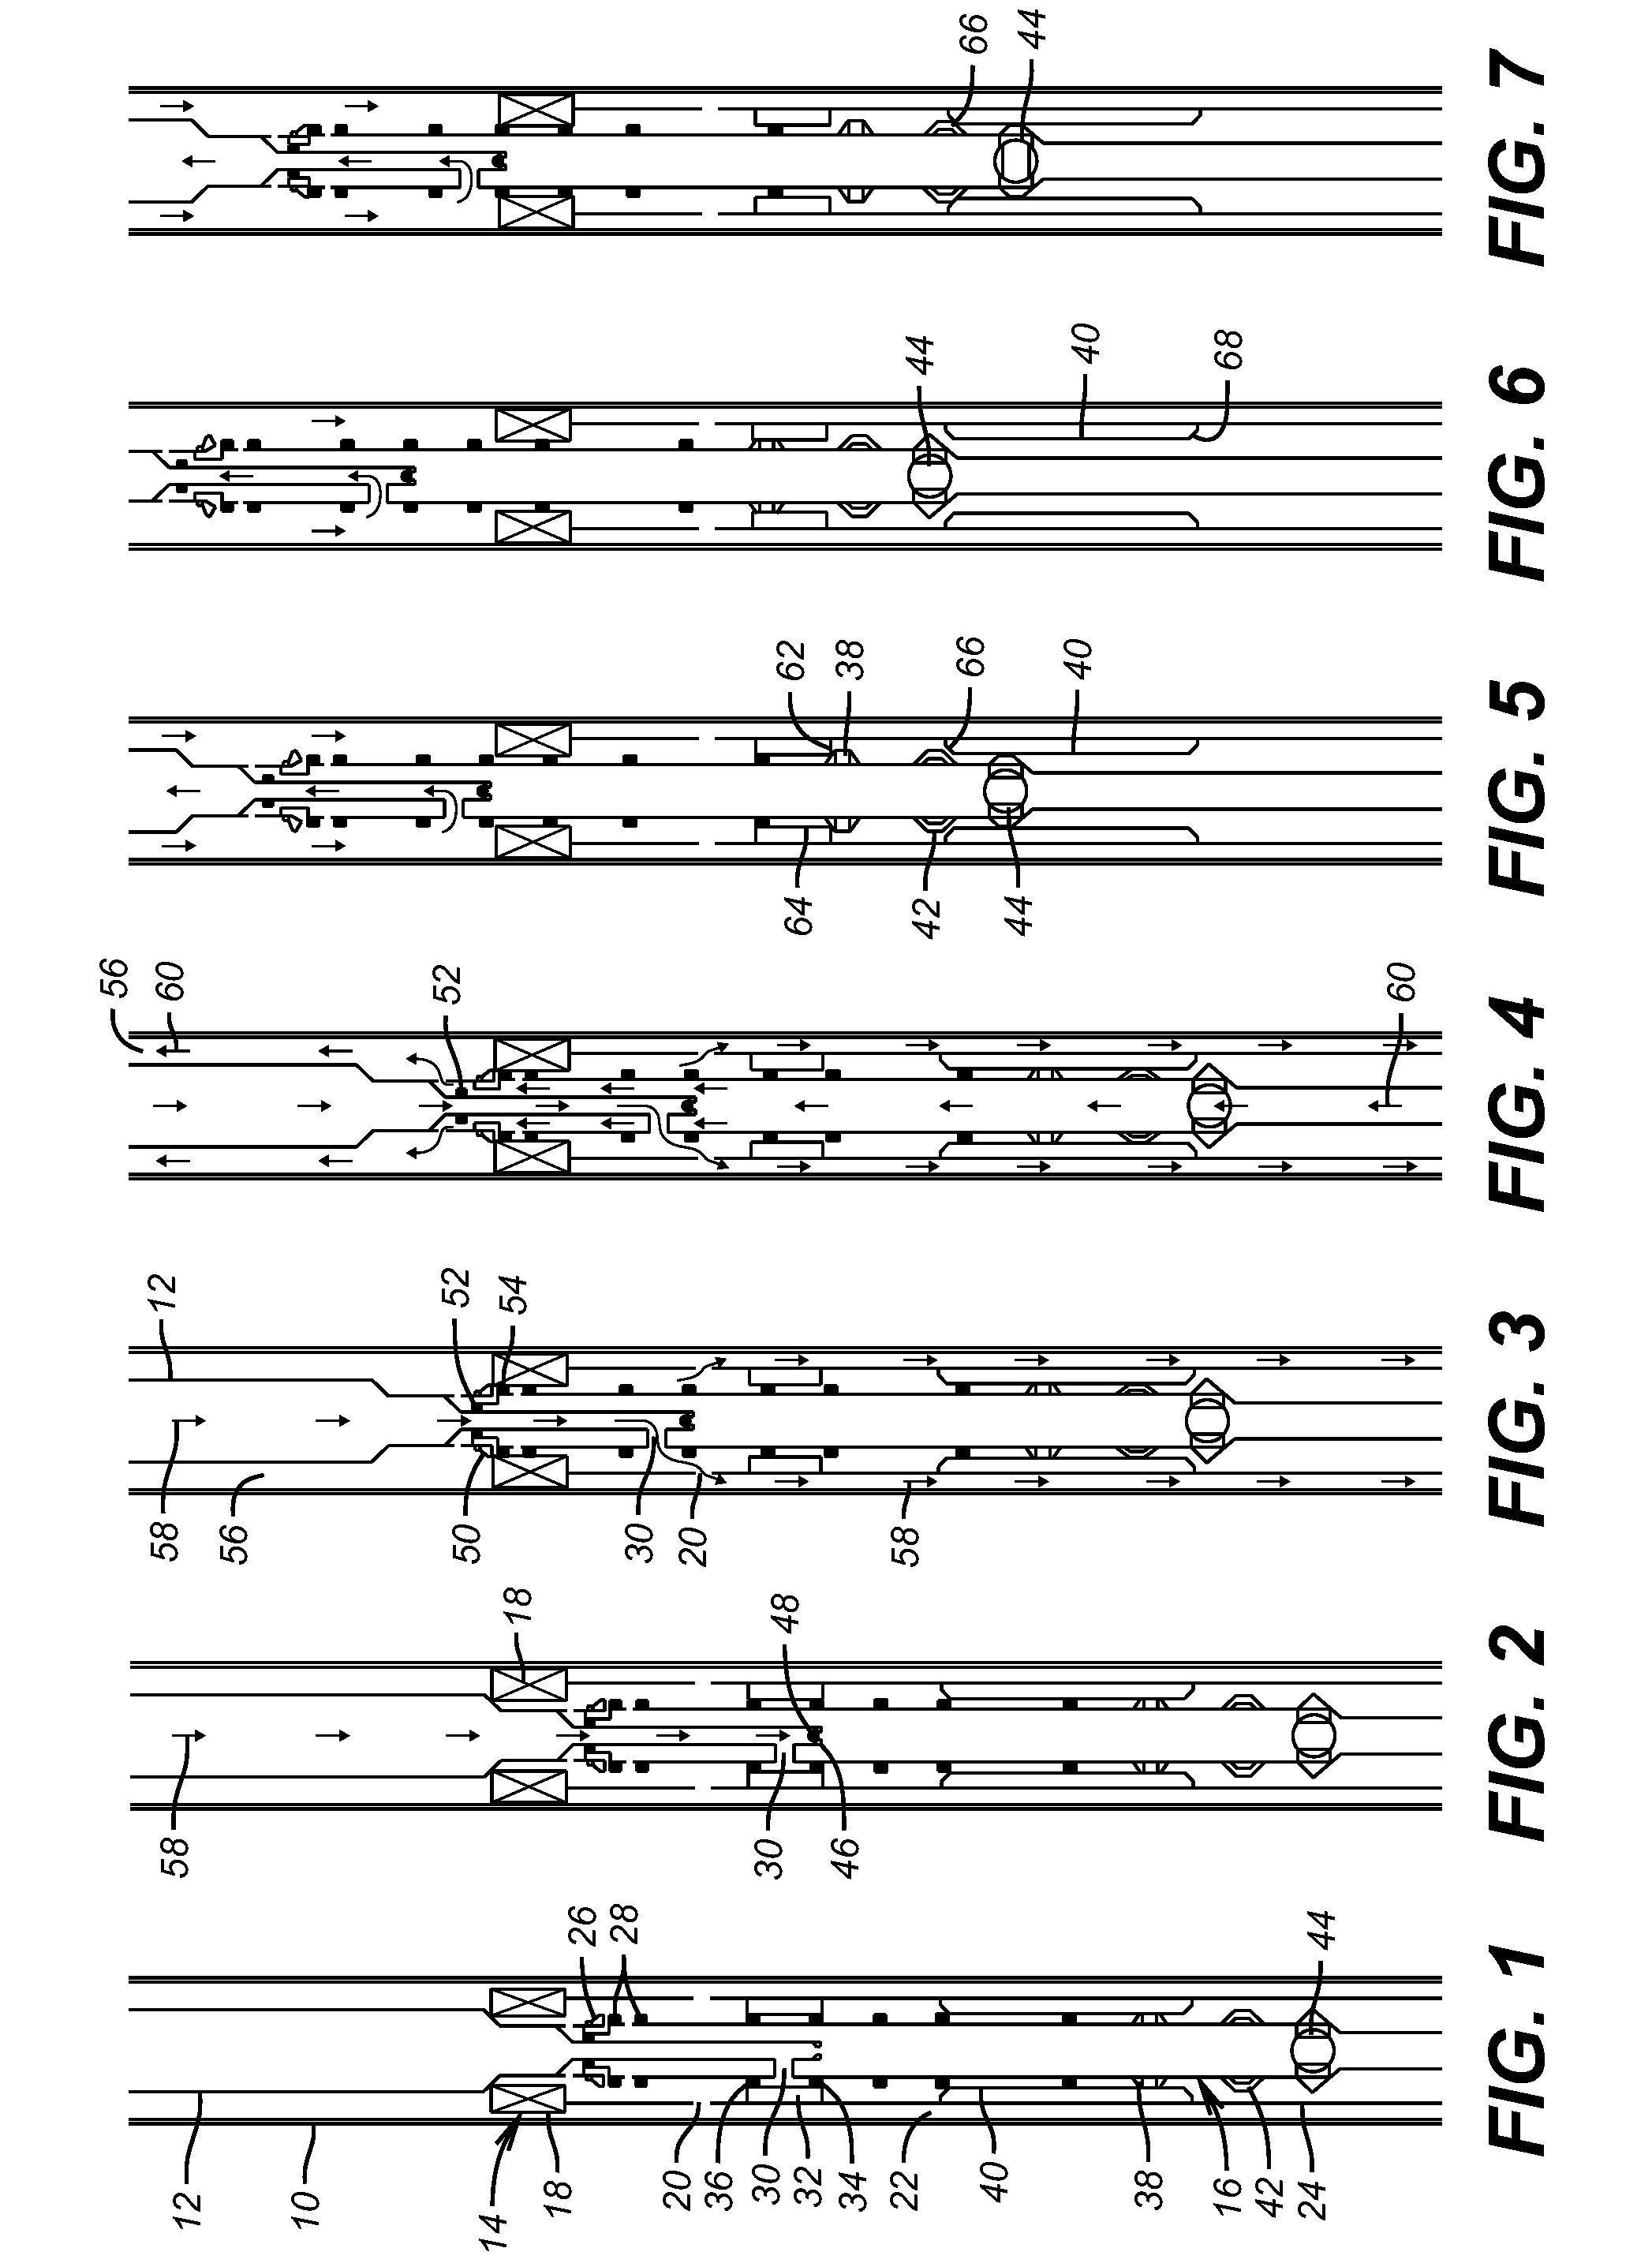 Fracturing and gravel packing tool with shifting ability between squeeze and circulate while supporting an inner string assembly in a single position